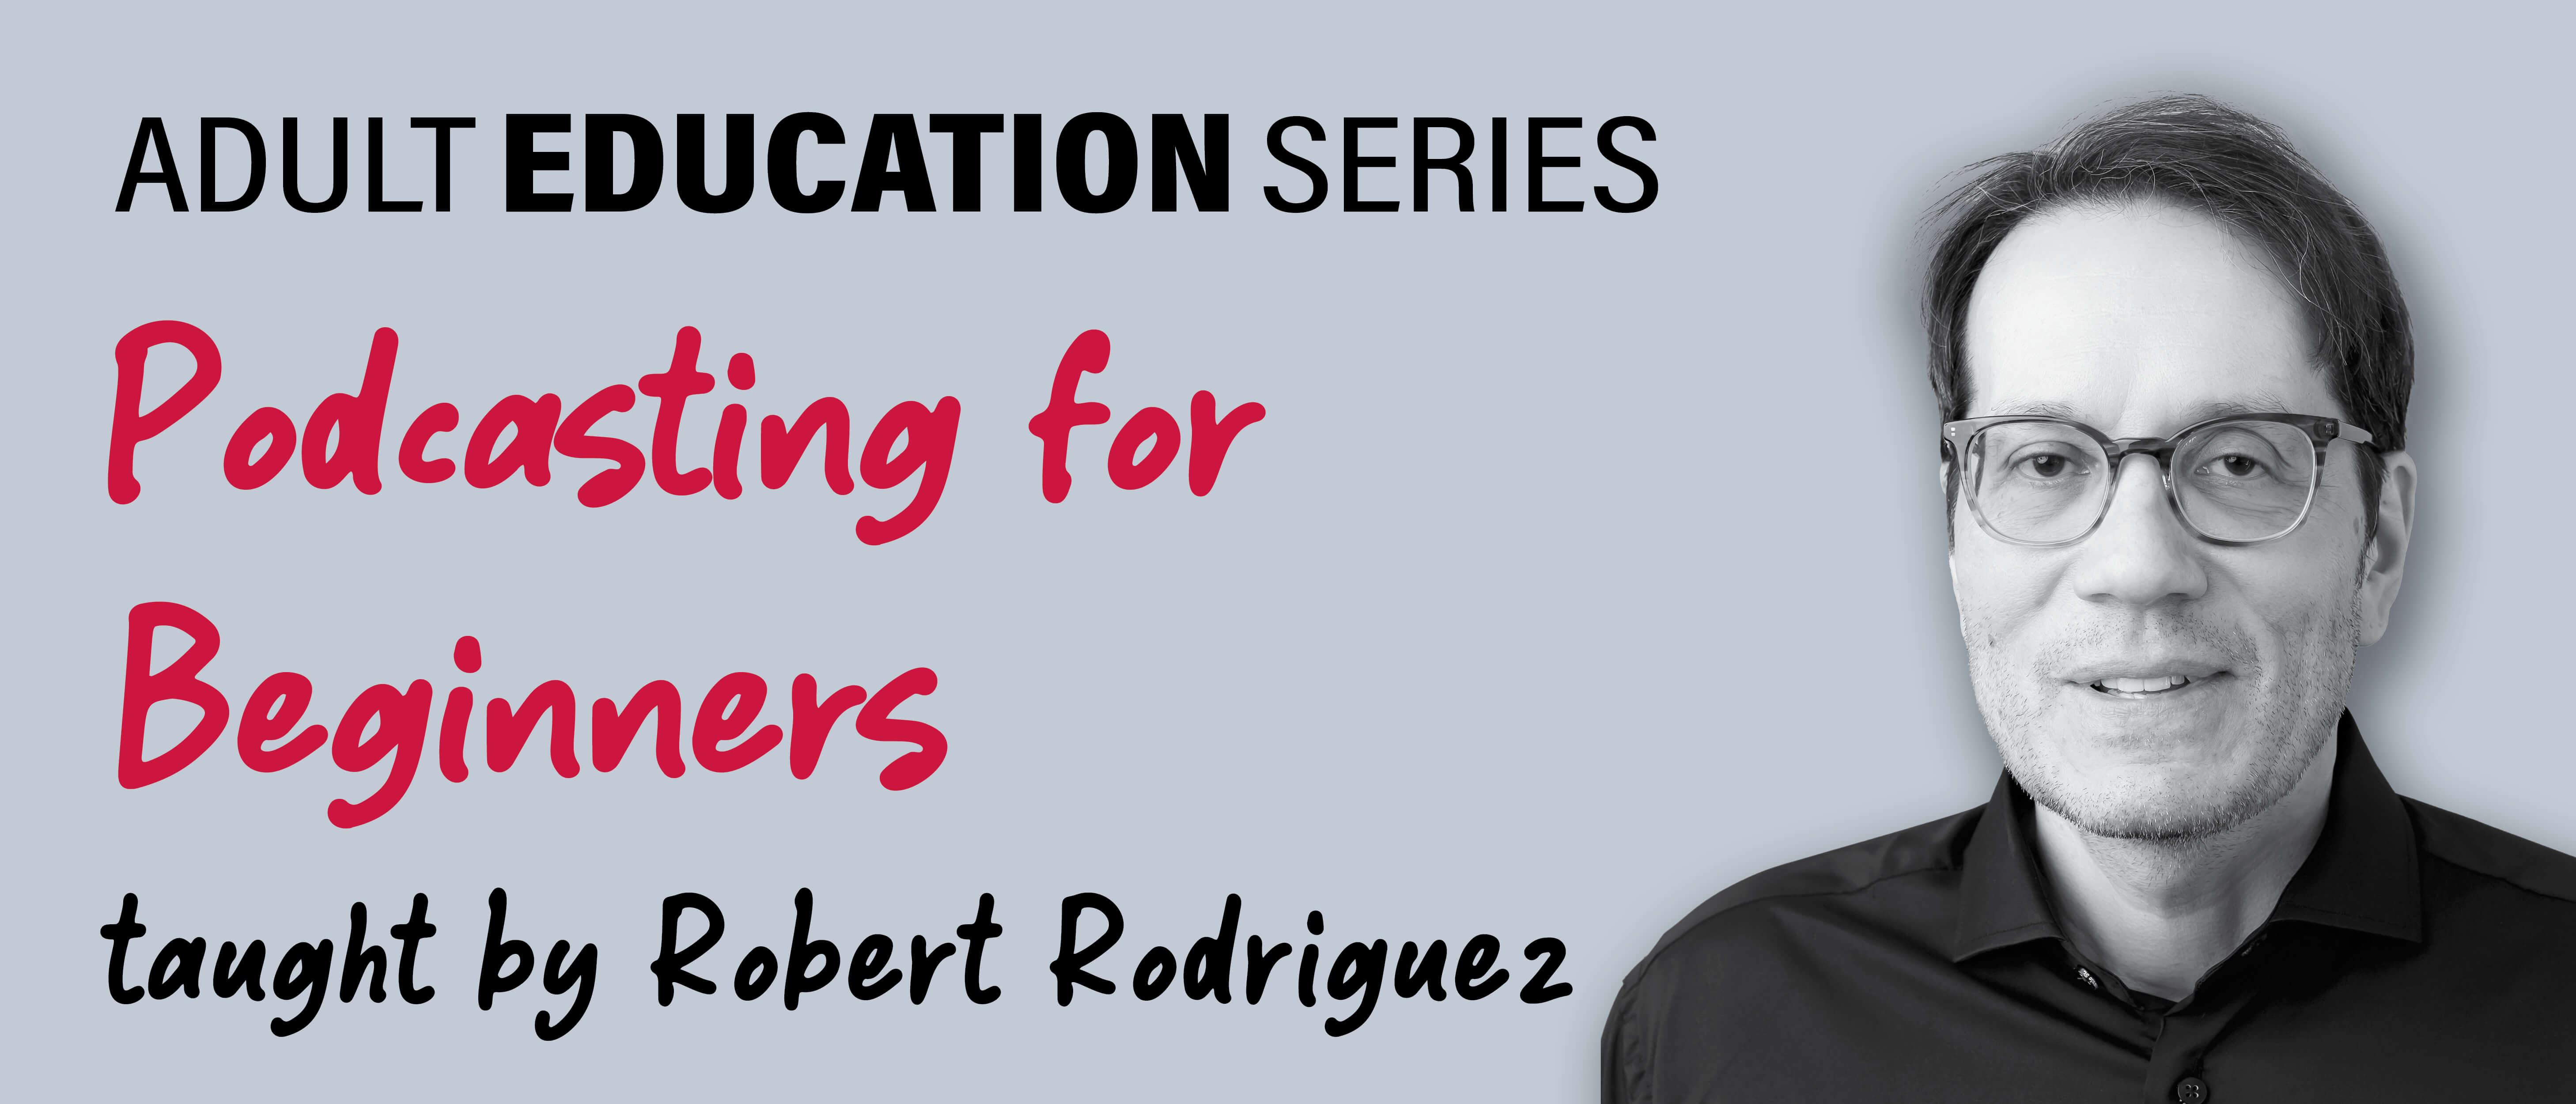 Adult Education Series: Podcasting for Beginners taught by Robert Rodriguez